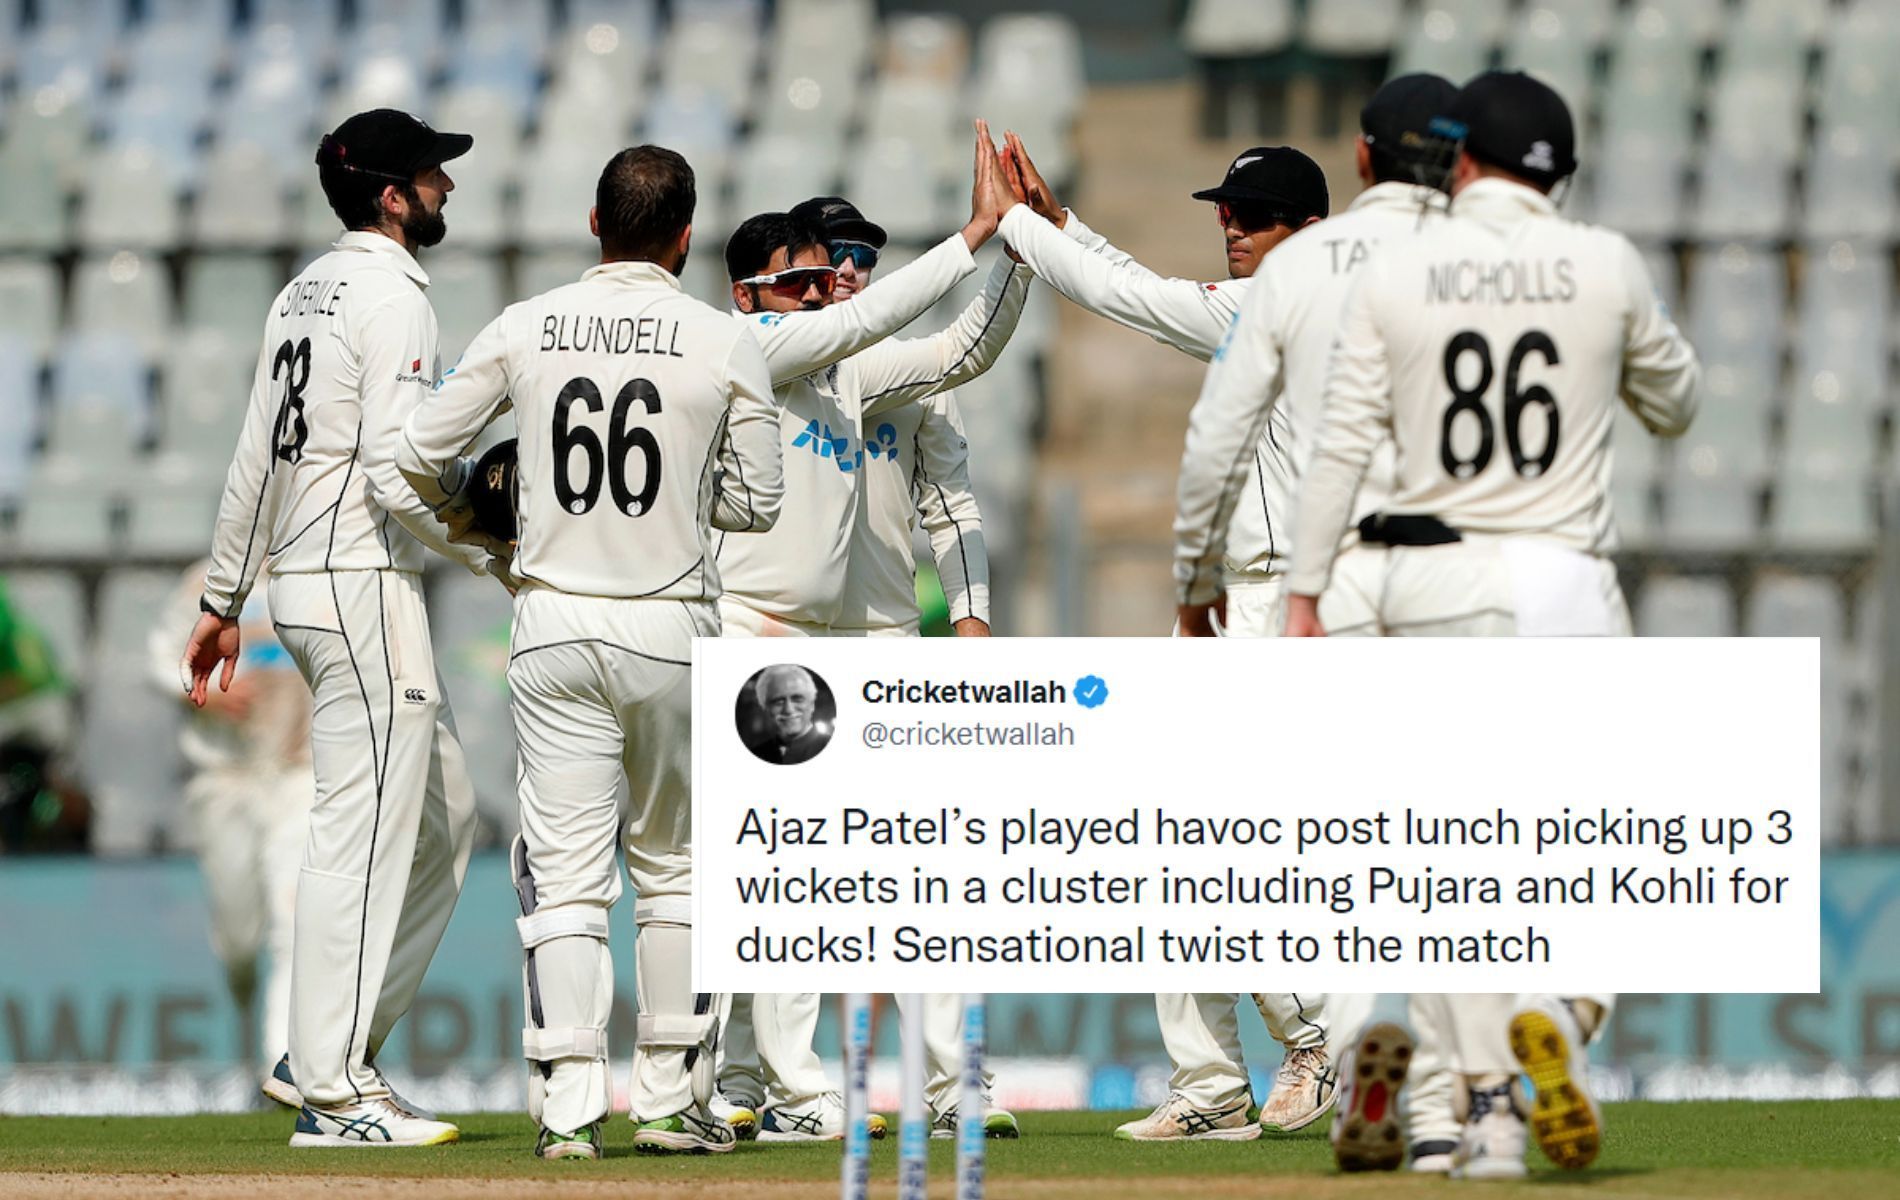 Ajaz Patel took three wickets to leave India reeling after a fine opening partnership.